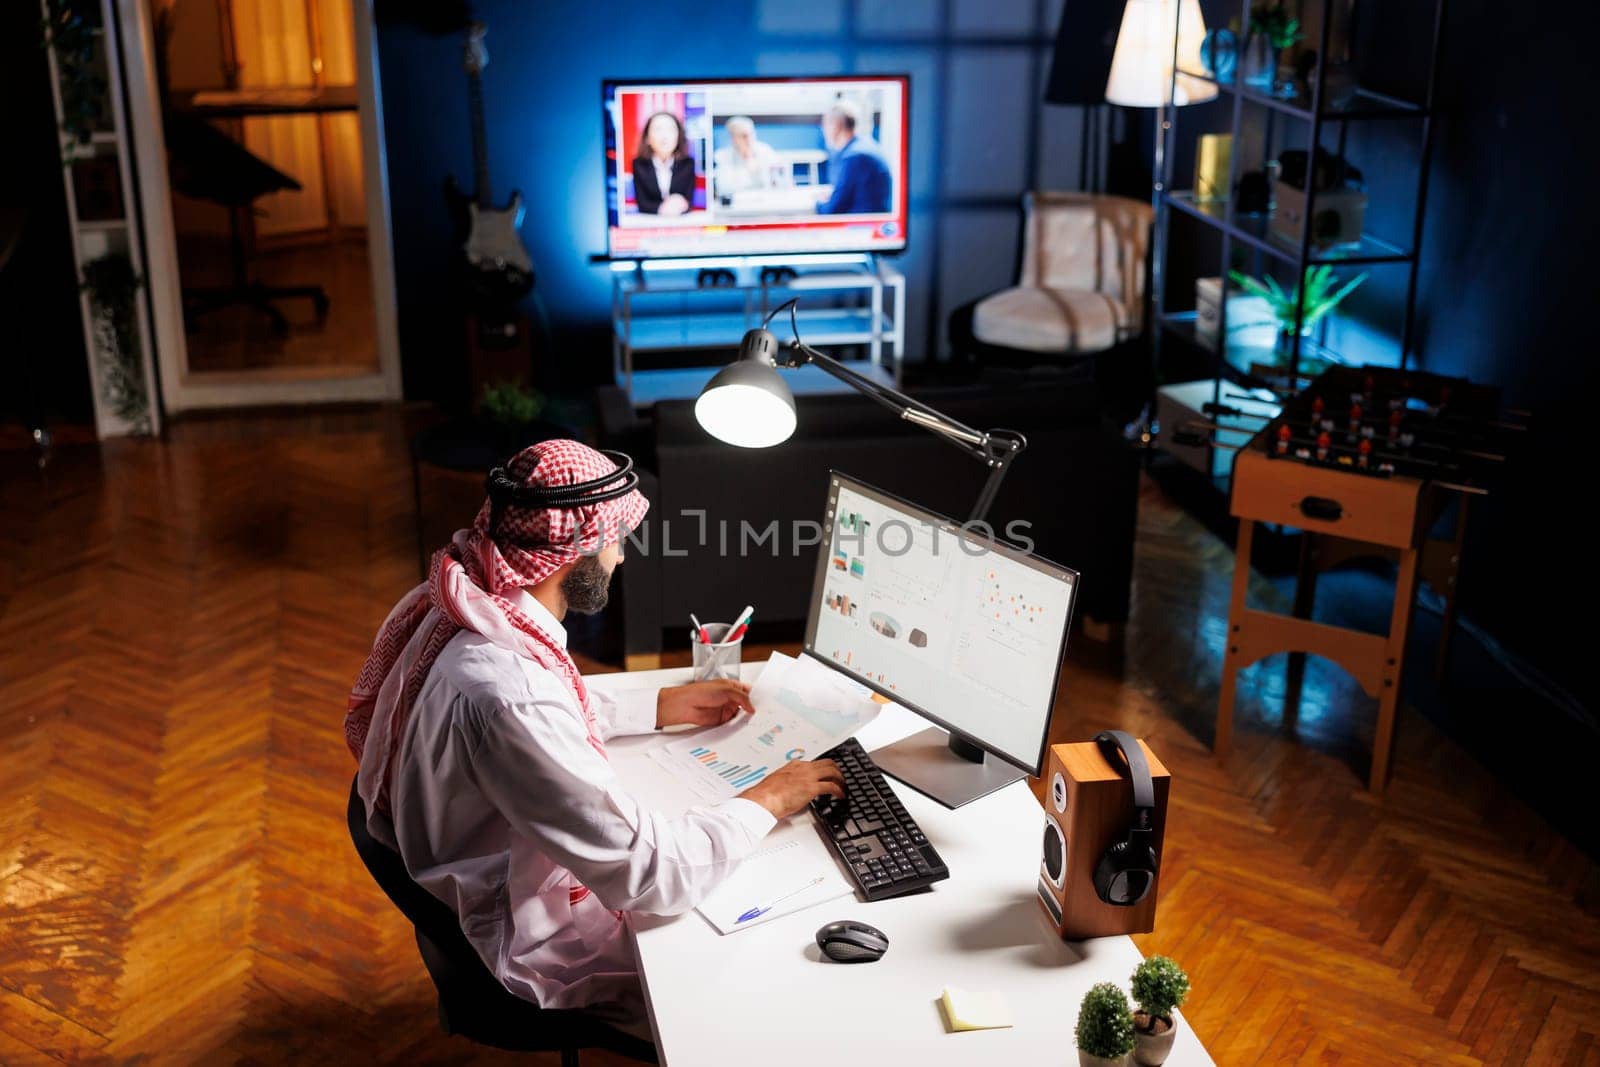 Muslim guy with paperwork diligently conducting online tasks efficiently. Young man in Islamic clothing manages his work with dedication and meticulousness by using a desktop PC. Overhead shot.